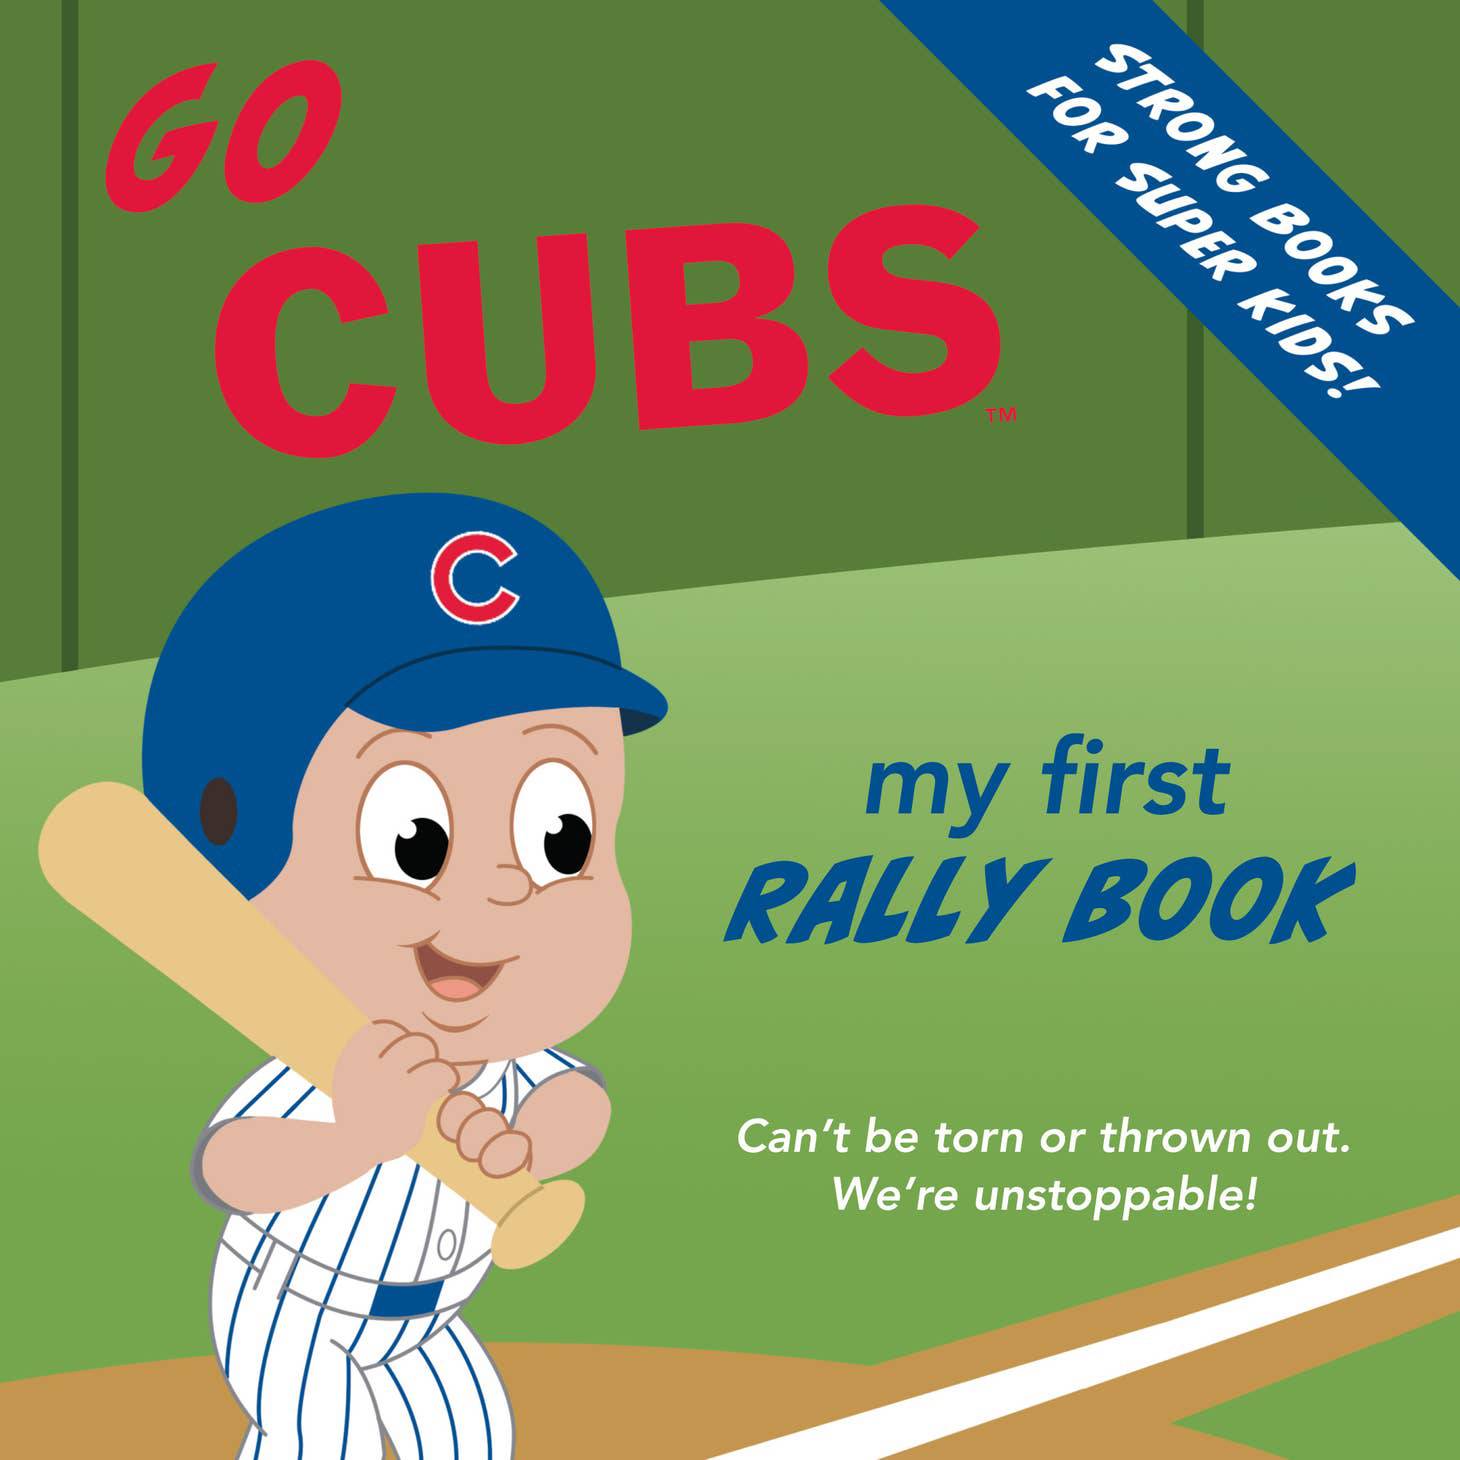 Go Cubs Rally Book - Twinkle Twinkle Little One